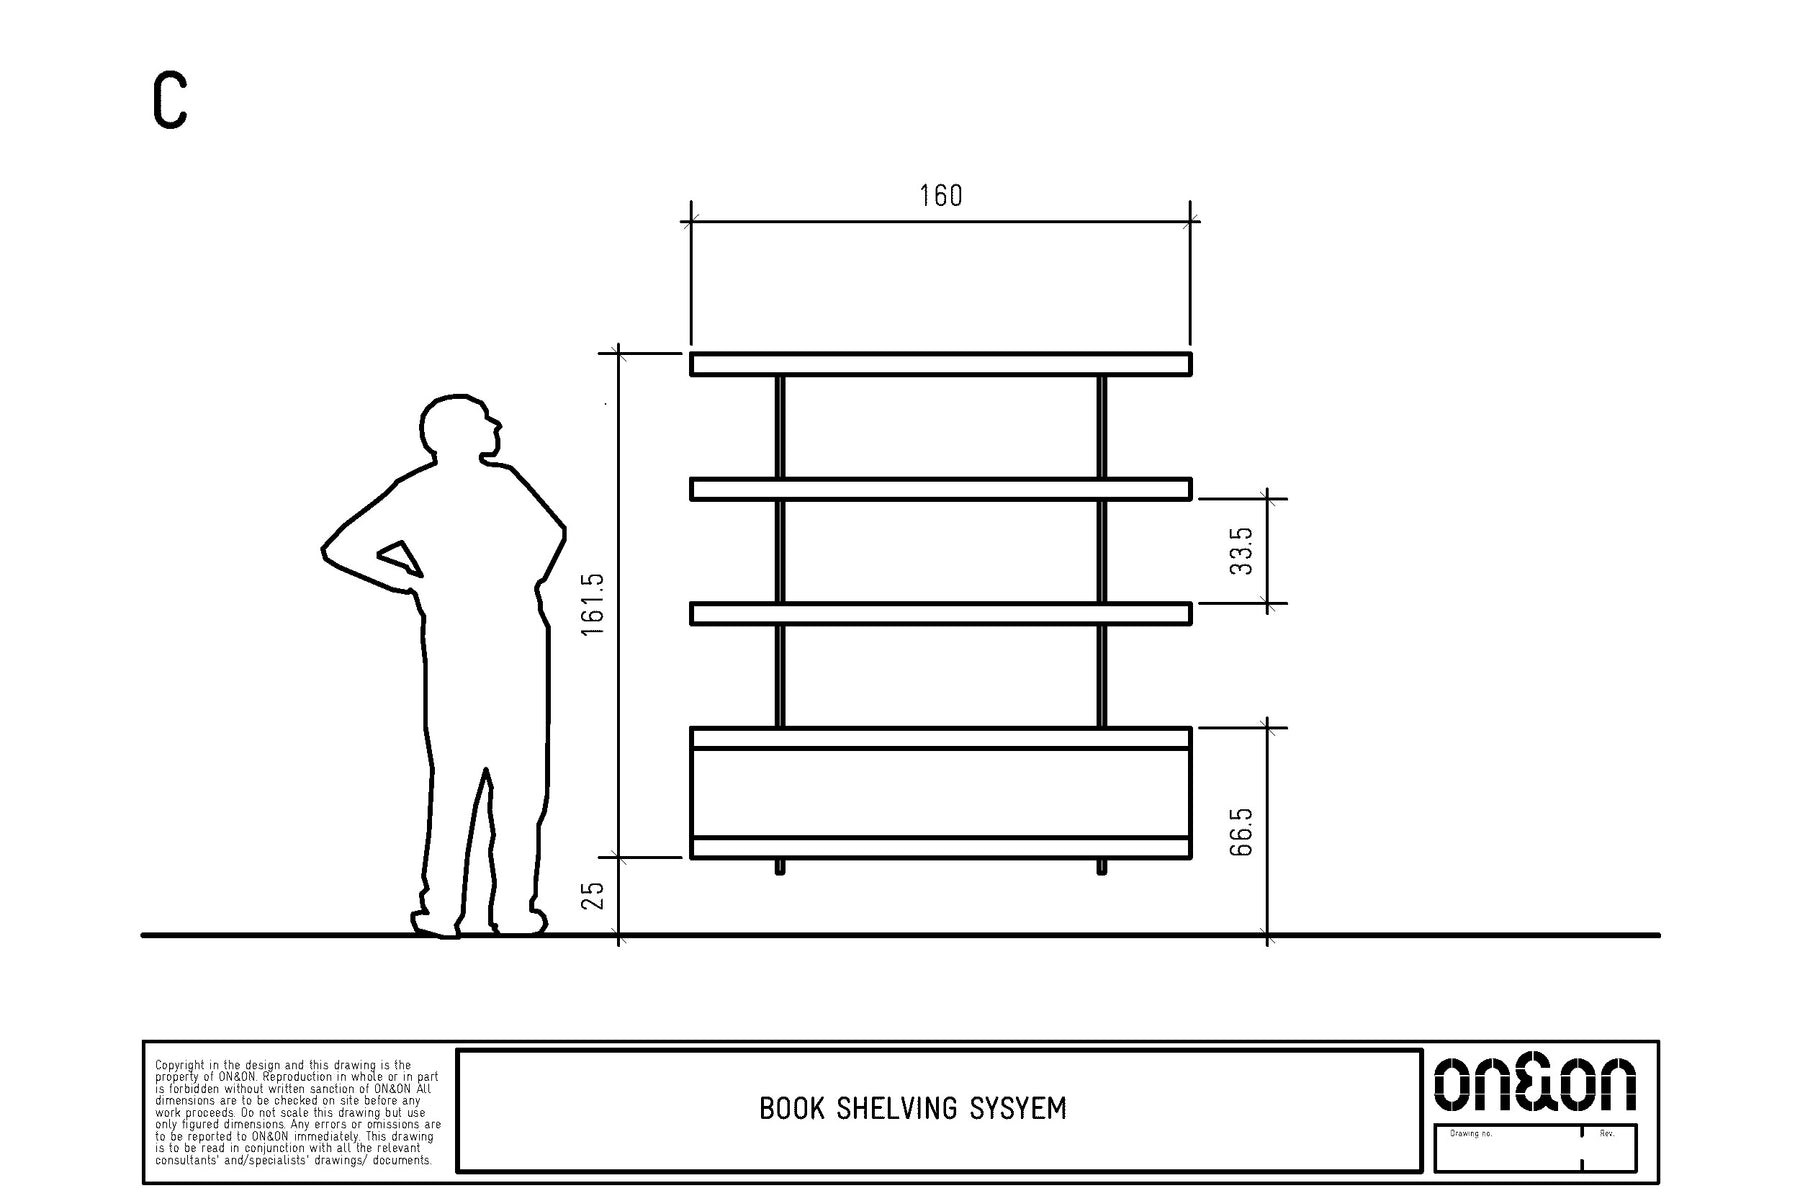 TV unit C drawing with sizes